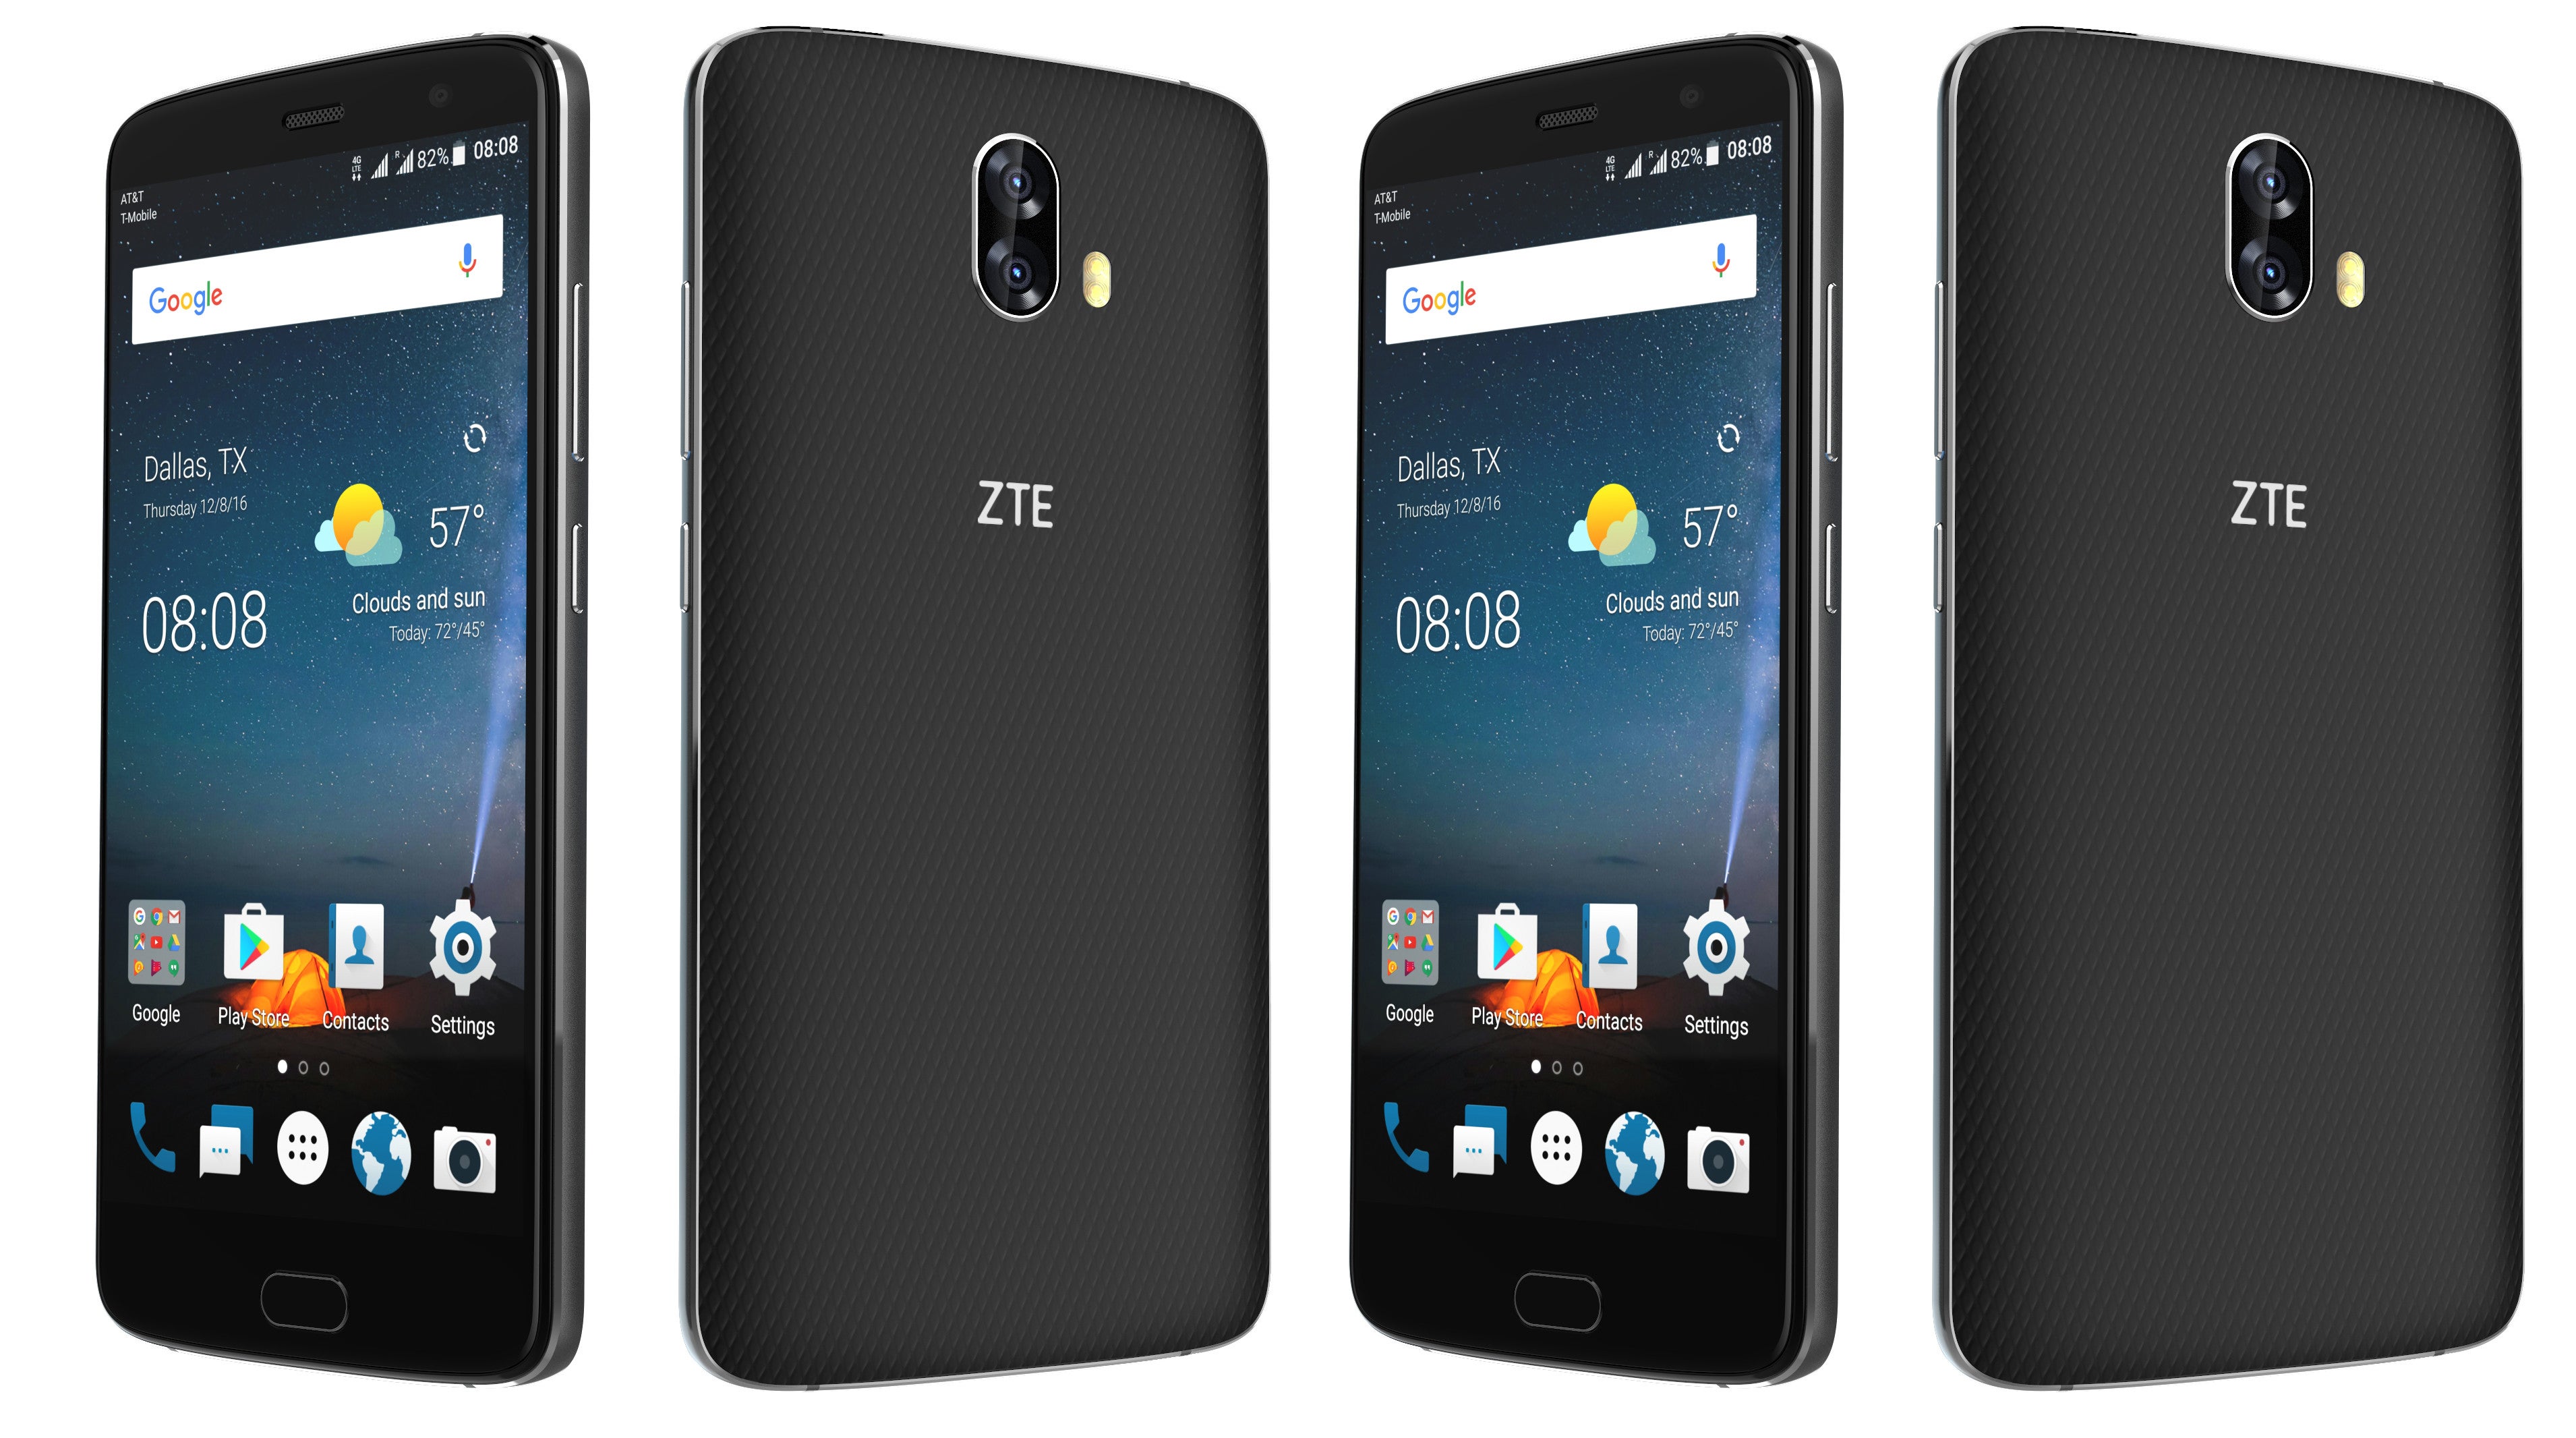 ZTE Blade V8 Pro comes to the U.S. with dual-camera, dual-SIM support and affordable price